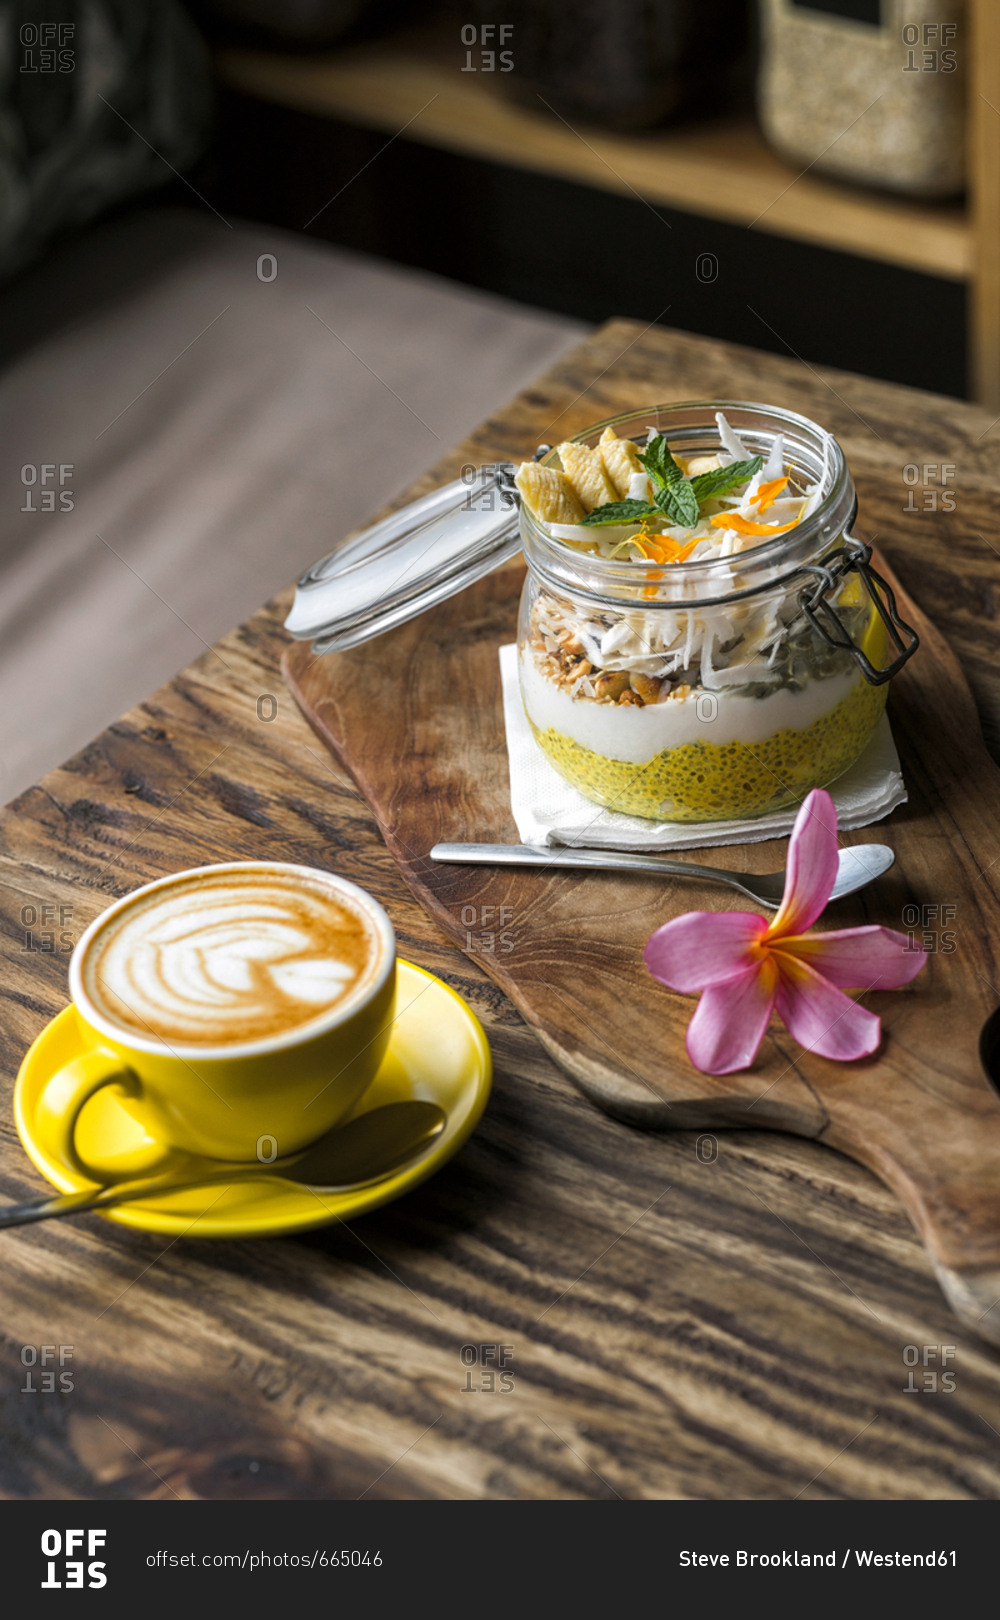 Exotic muesli with flower and coffee cup on a wooden table